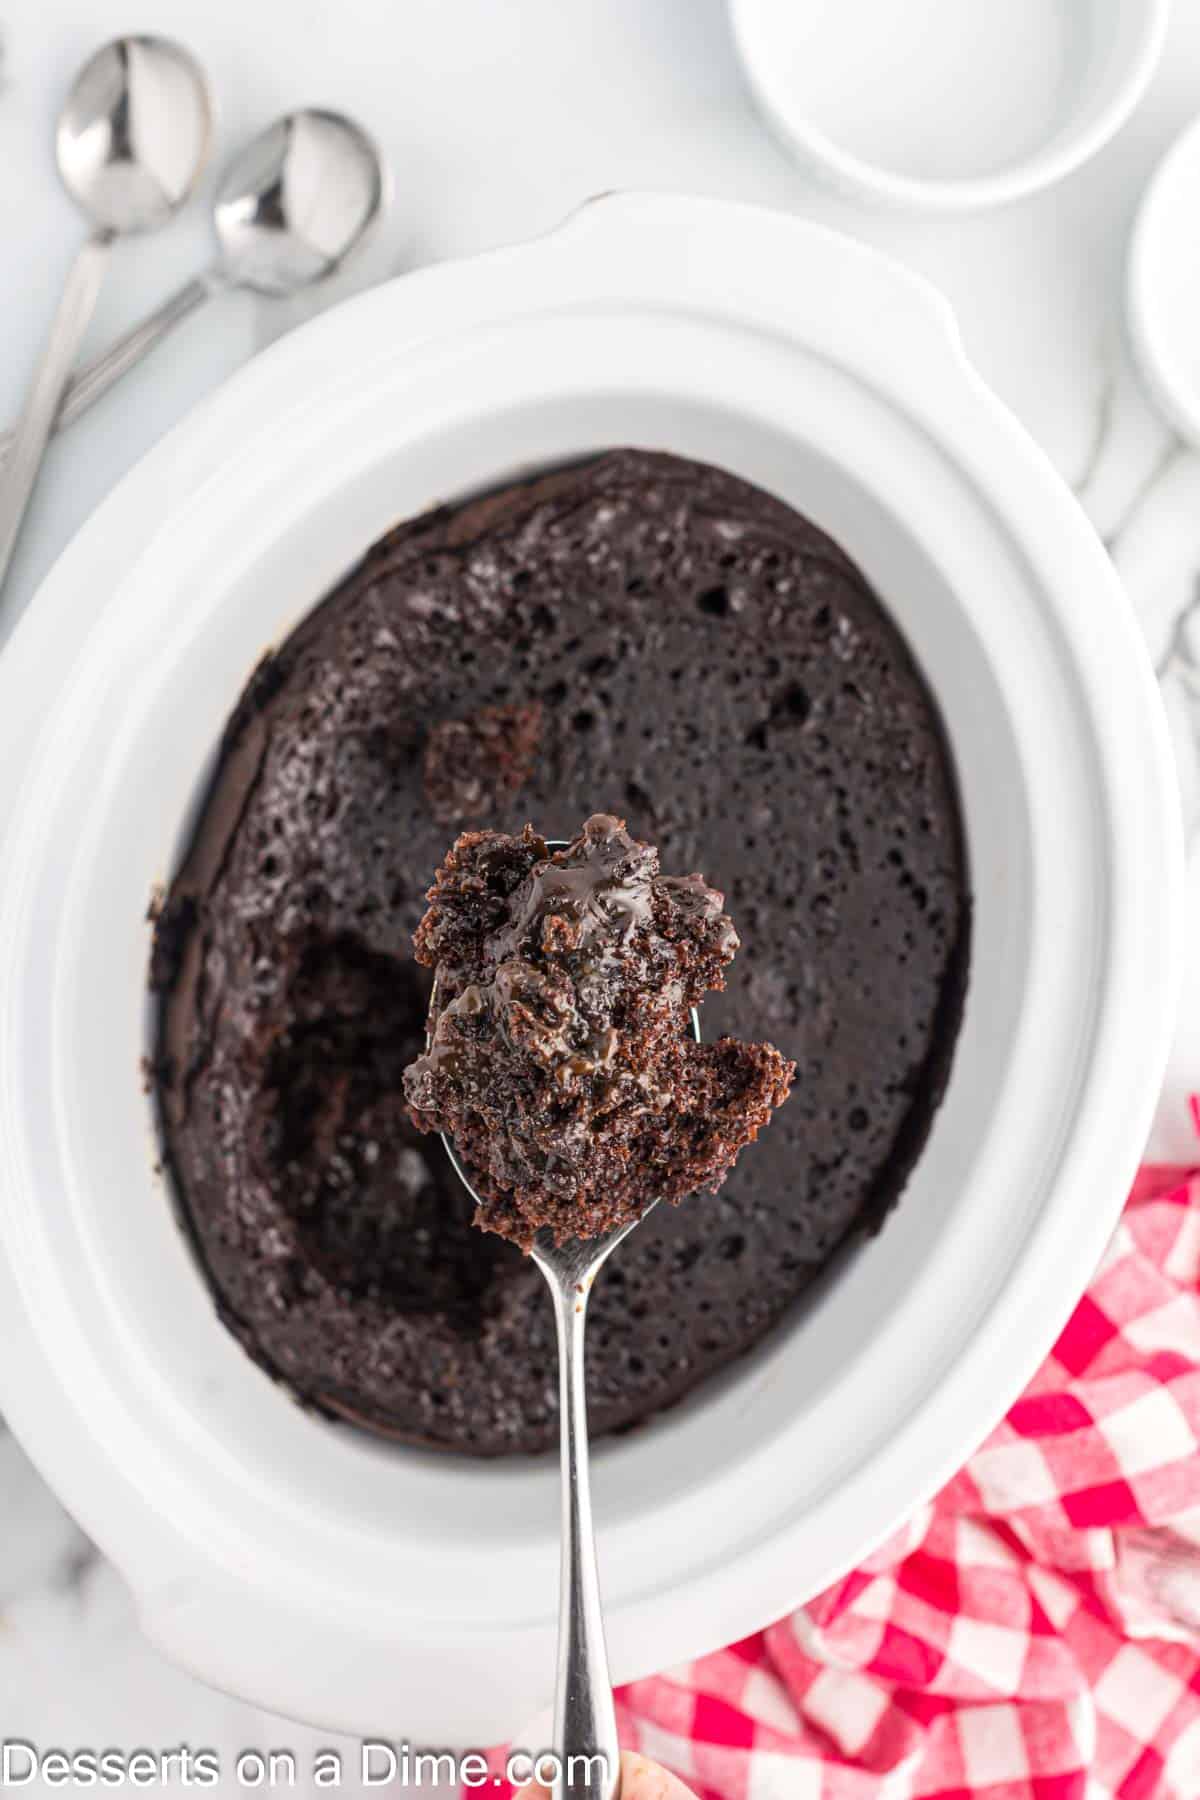 Chocolate lava cake with a serving on a spoon